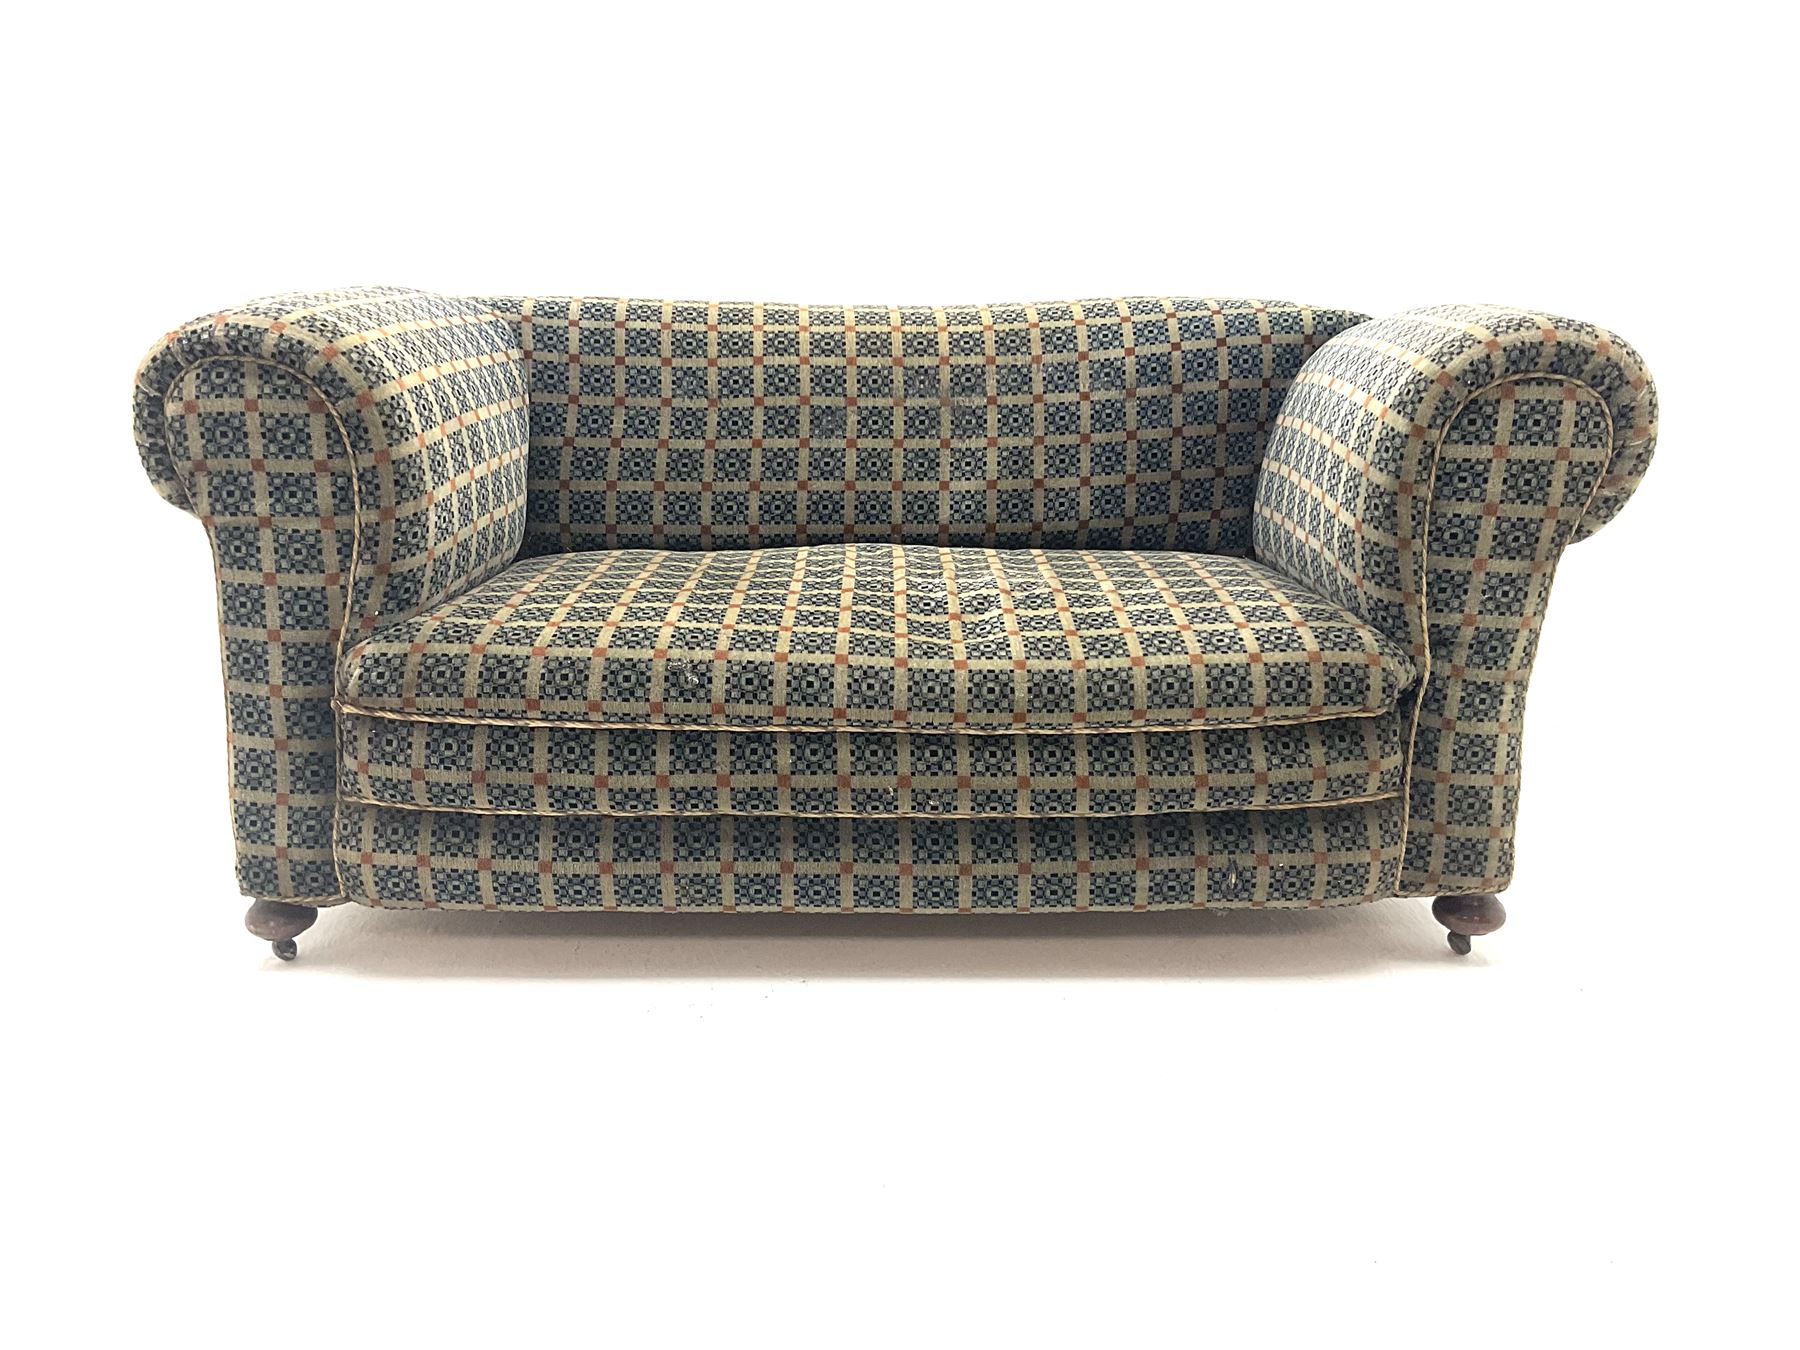 Early 20th century two seater drop arm sofa